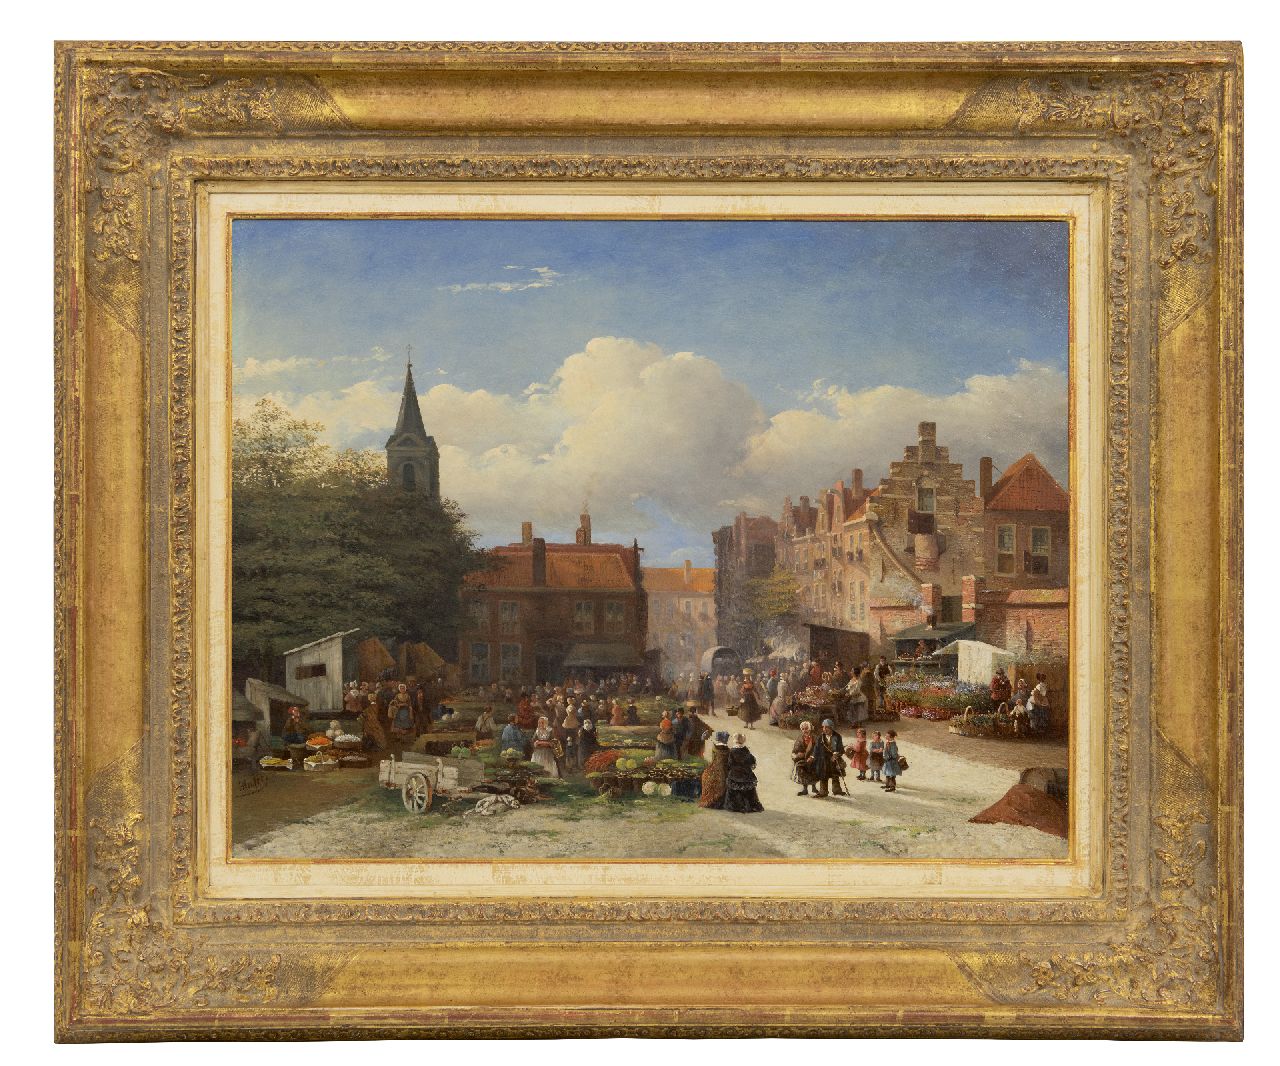 Bles J.  | Joseph Bles, A vegetable and flower market in a Dutch town, oil on panel 45.3 x 58.8 cm, signed l.l. and dated '51